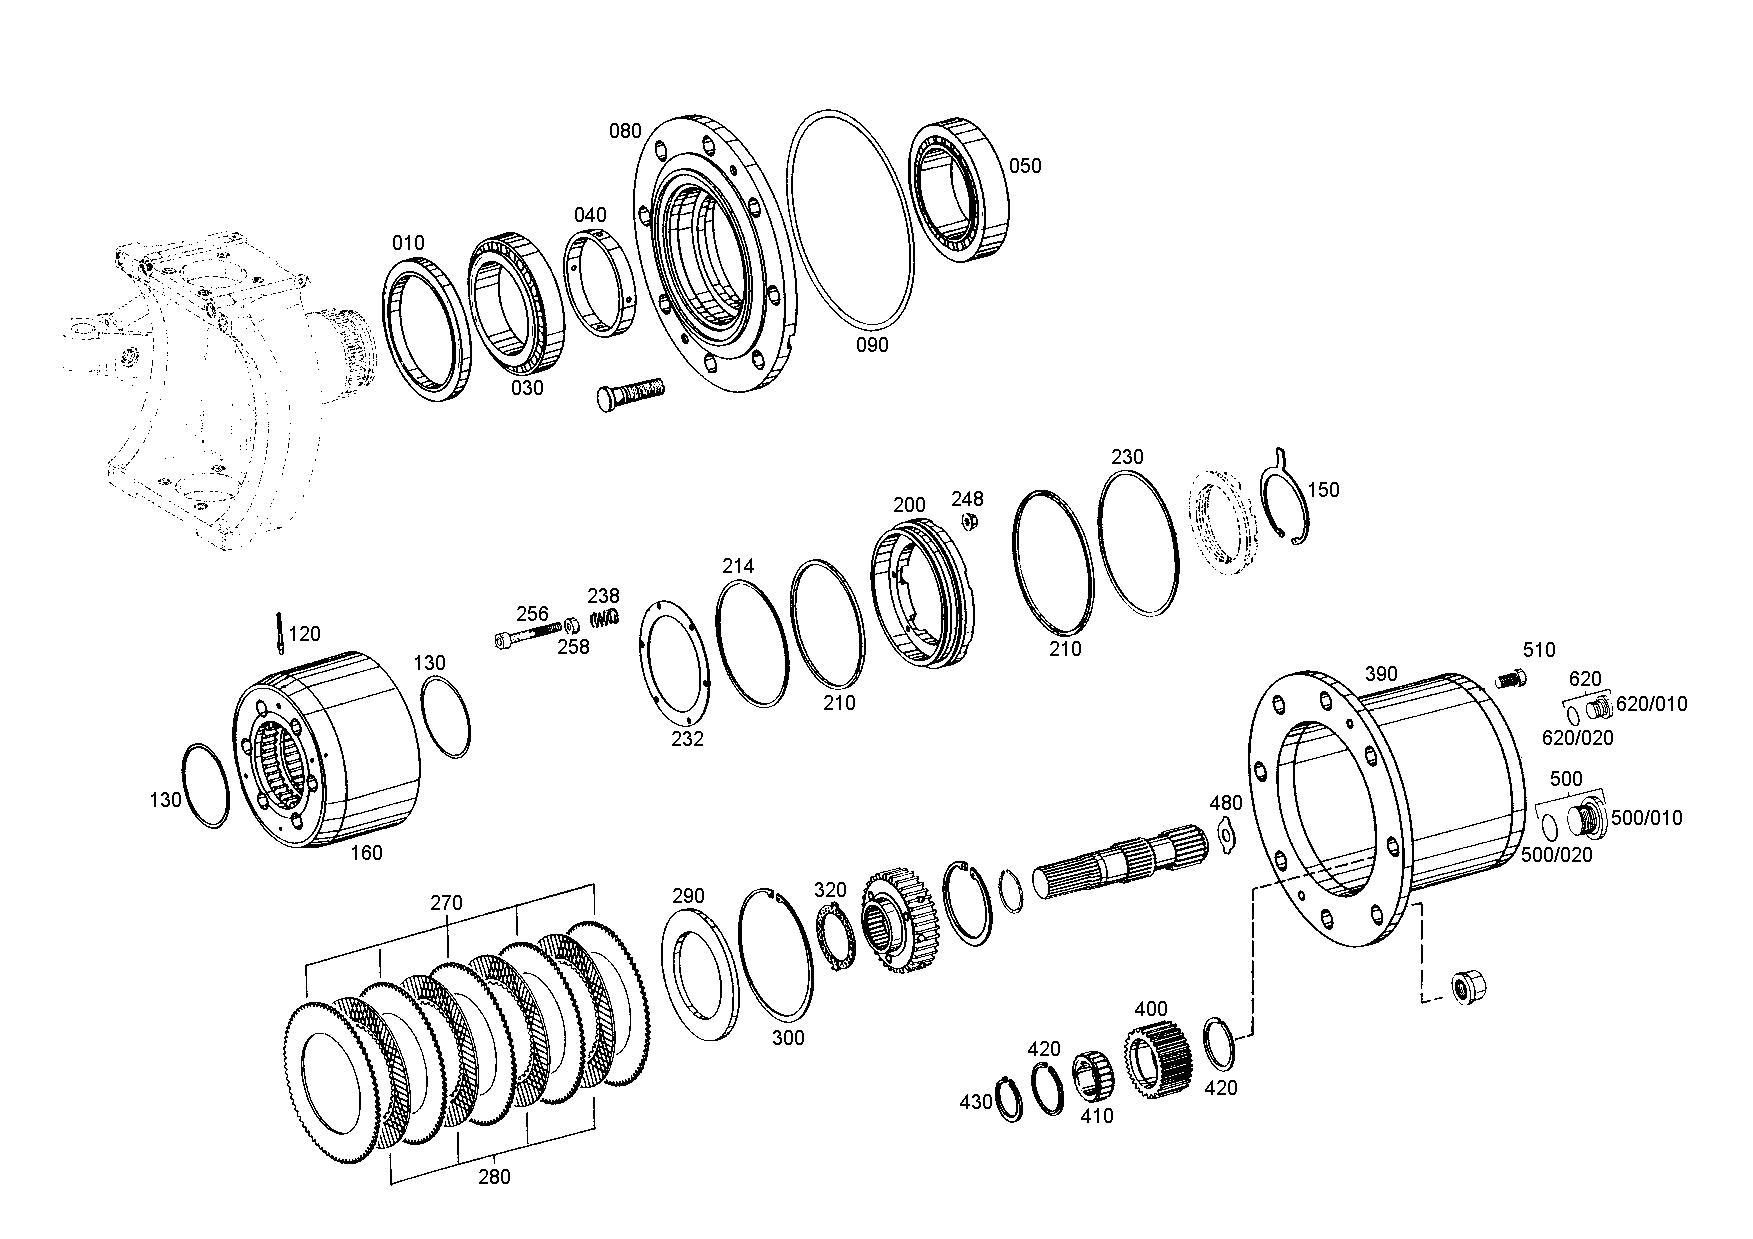 drawing for CATERPILLAR INC. 028791 - RING (figure 5)